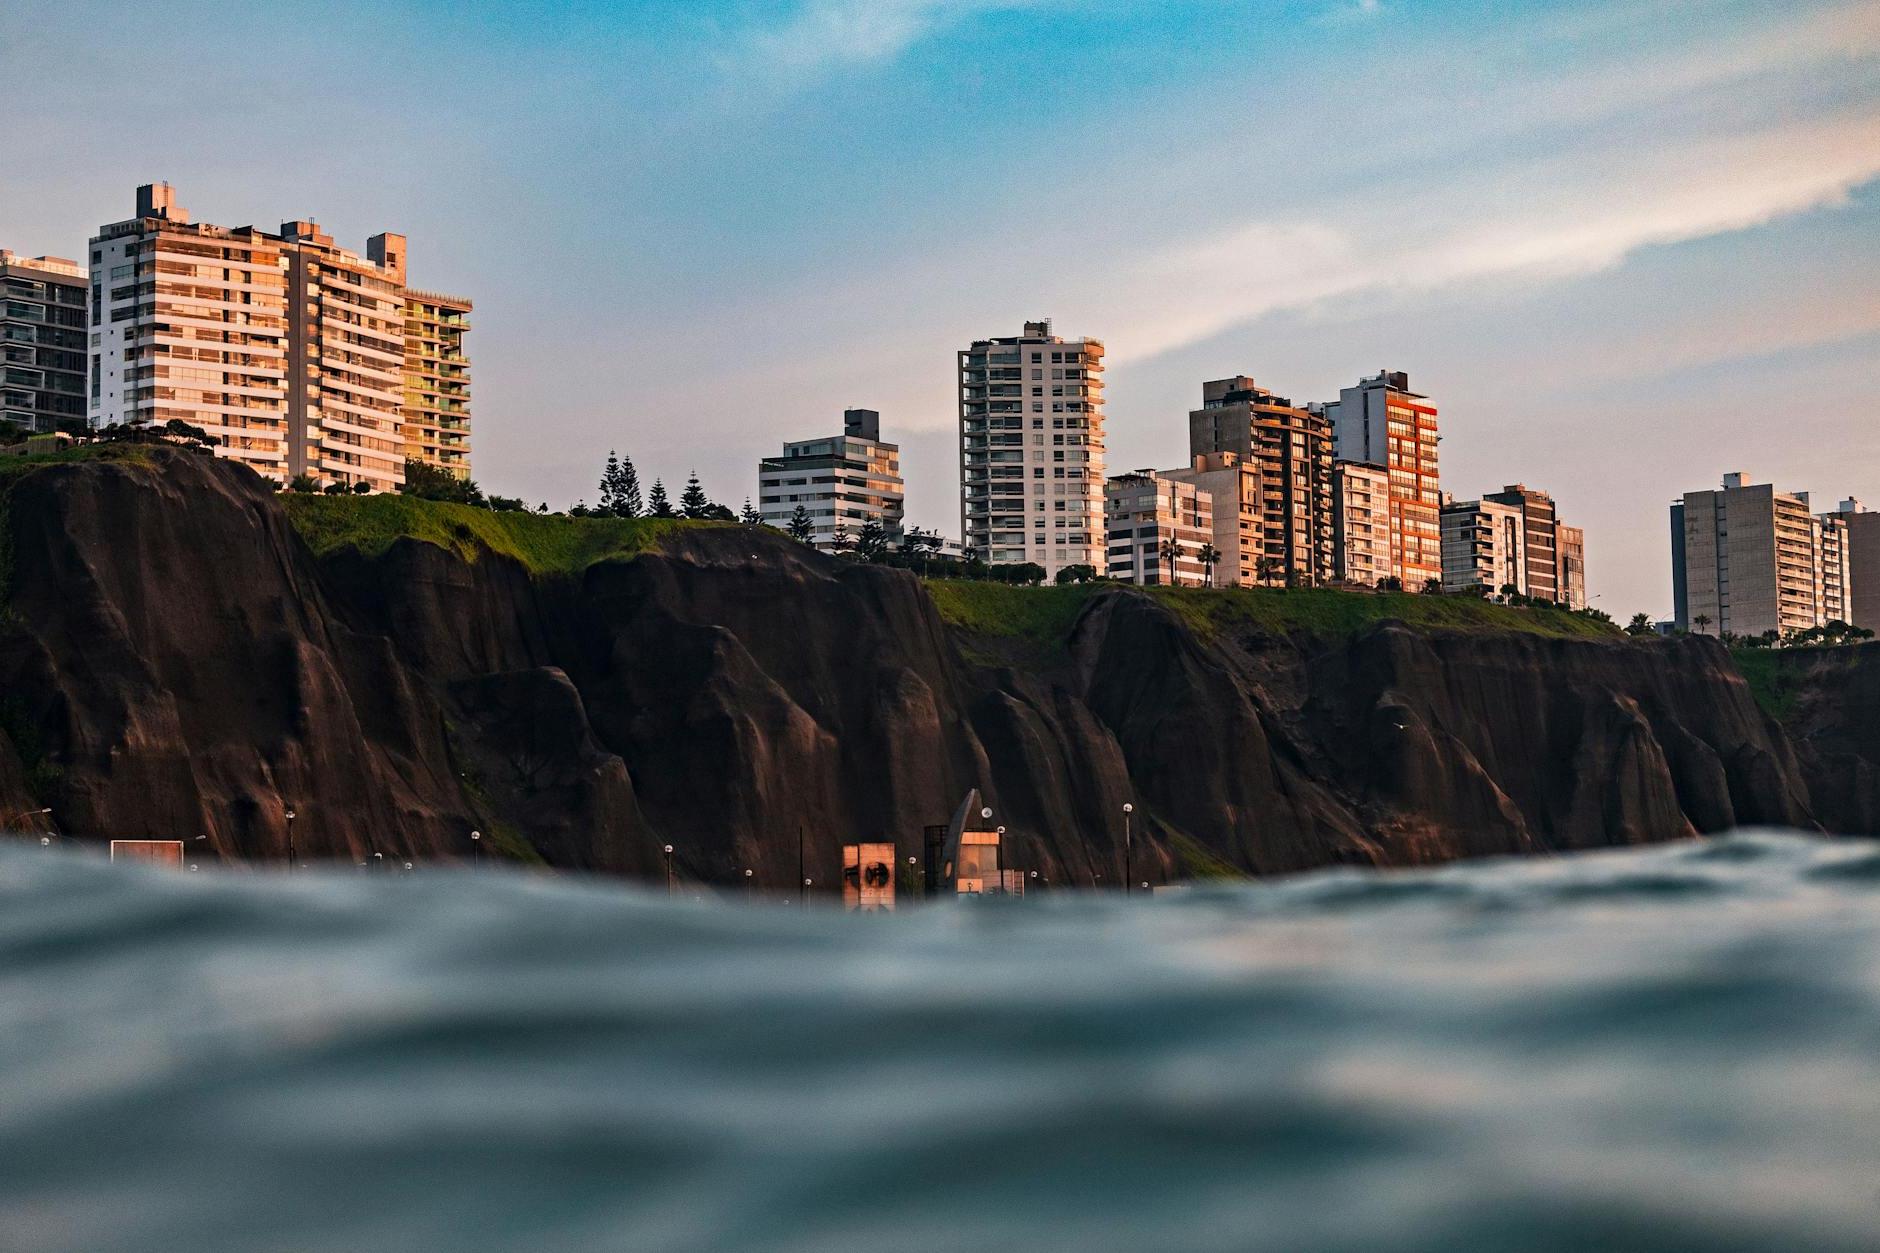 Blocks of Flats on the Cliff in Lima, Peru